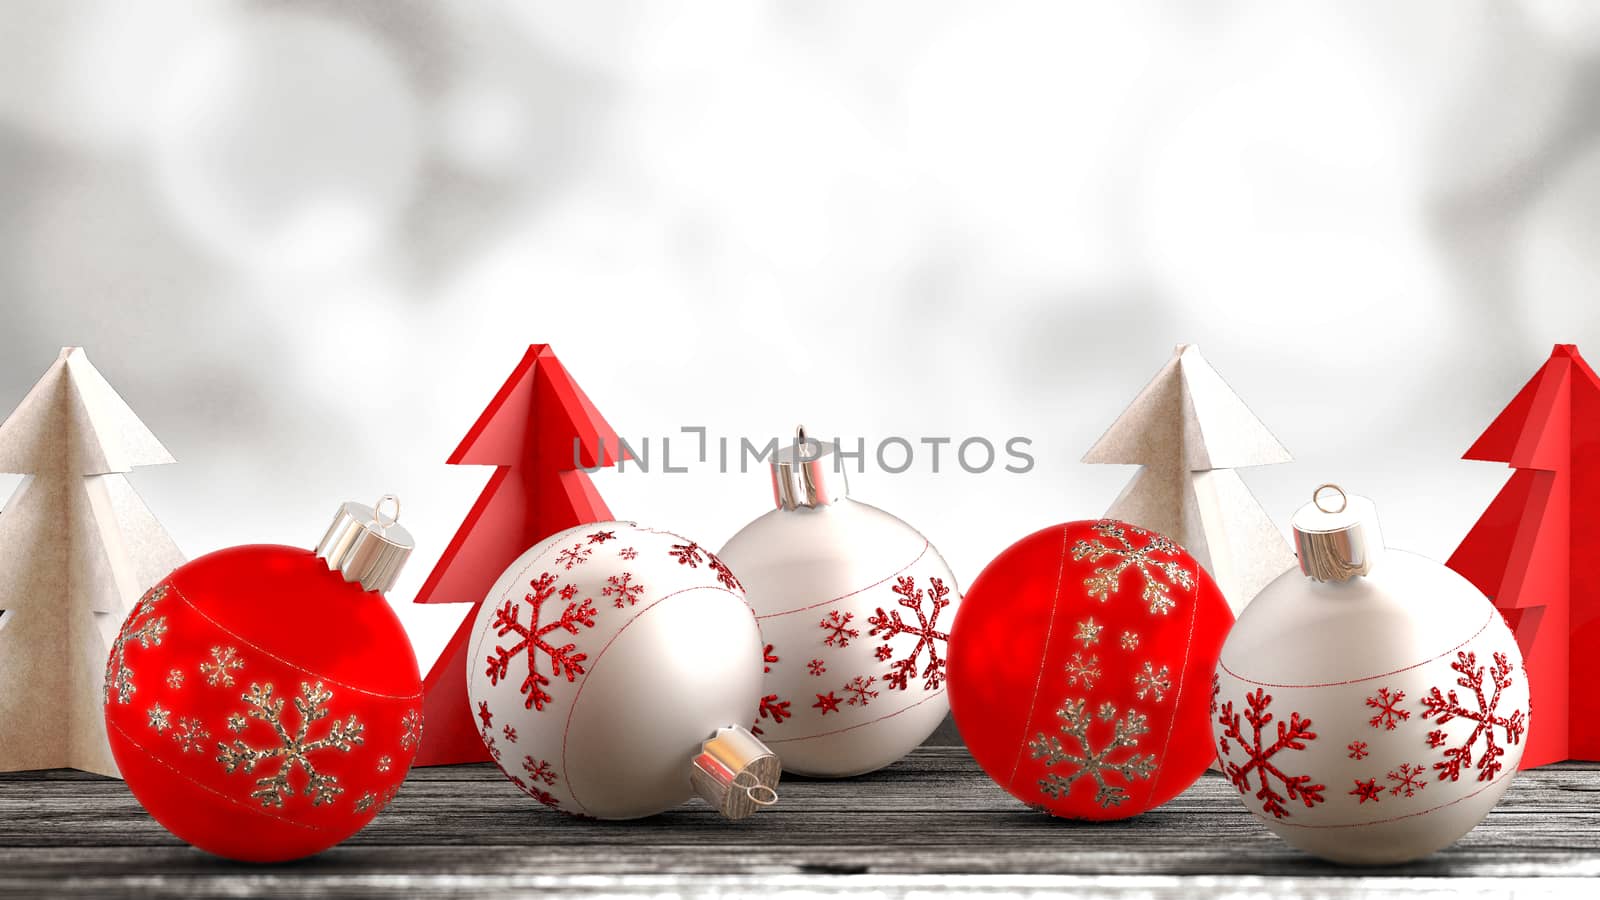 Christmas ornaments, balls, paper trees on a wooden table in front of bokeh background. Copy space available.